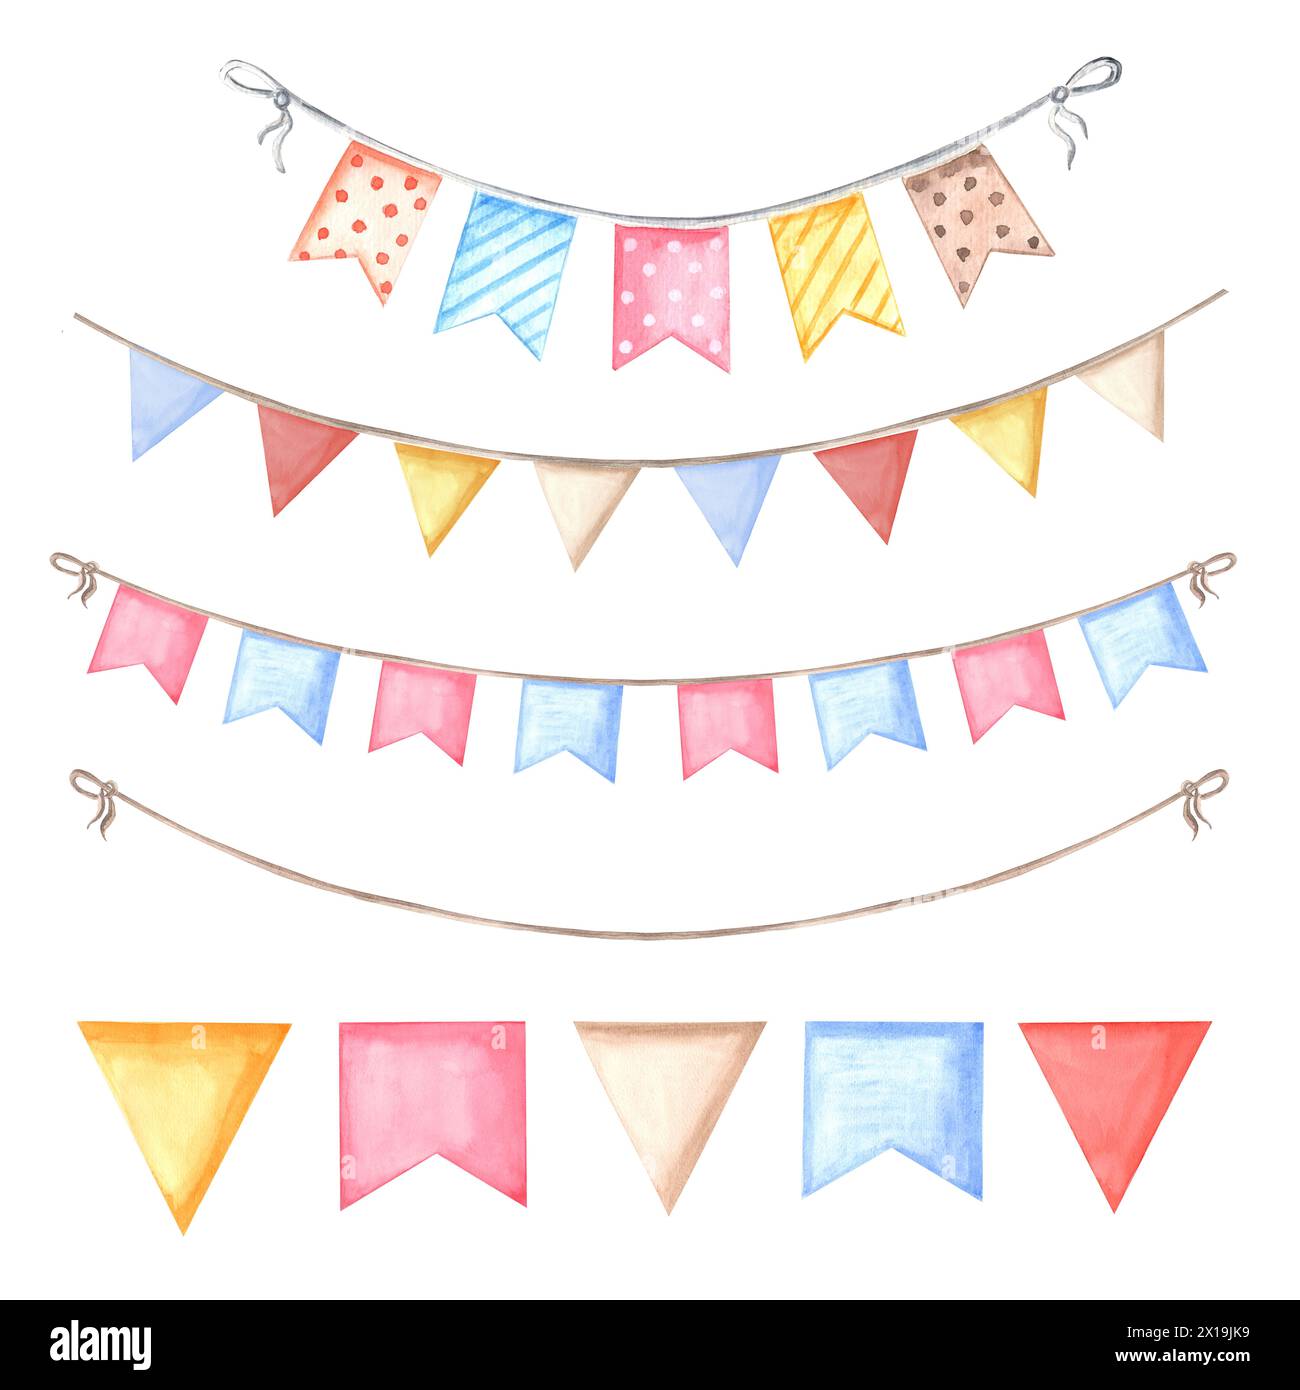 Flags and pennants Watercolor illustrations set. Cute festive hanging garlands colorful. Template of holiday decoration. Isolated hand drawn clip art Stock Photo